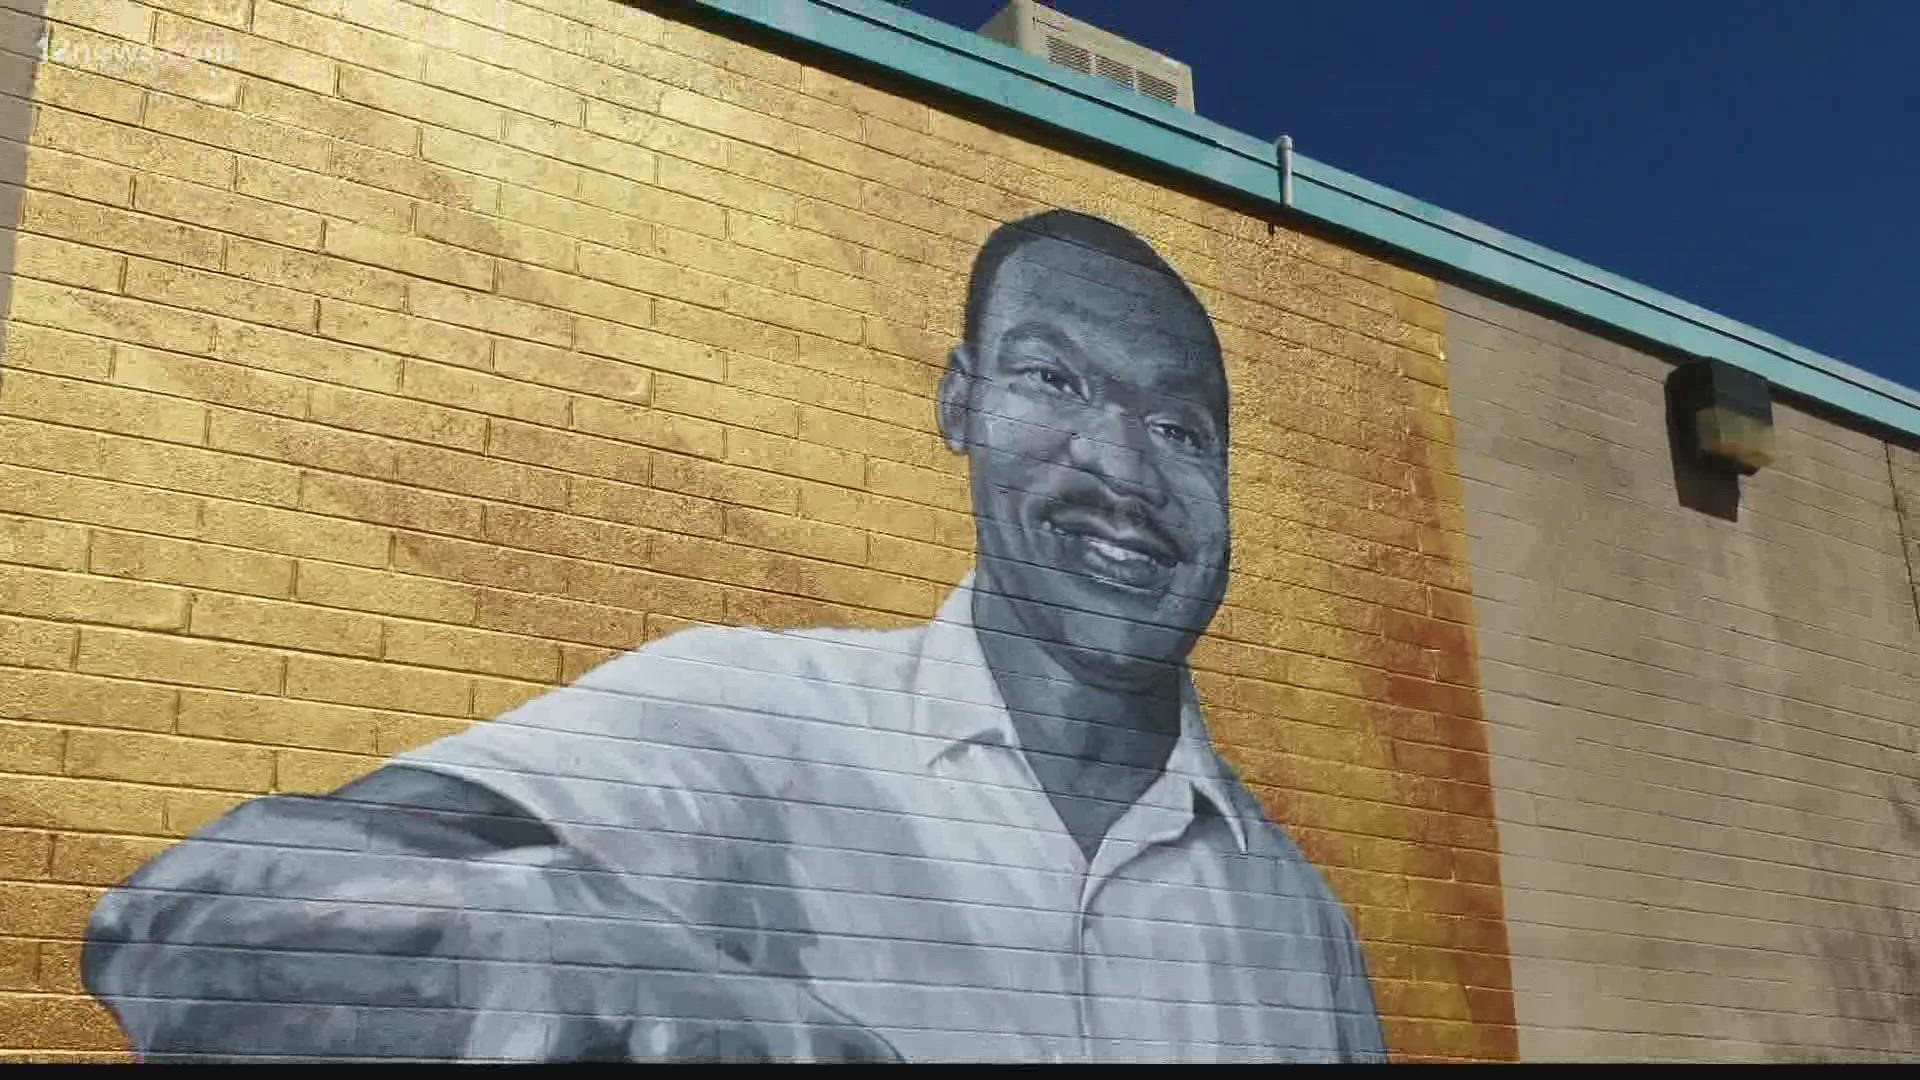 The murals are places where vibrant colors meet historical figures such as Jackie Robinson and Rosa Parks. The project seeks to link past struggles with today.